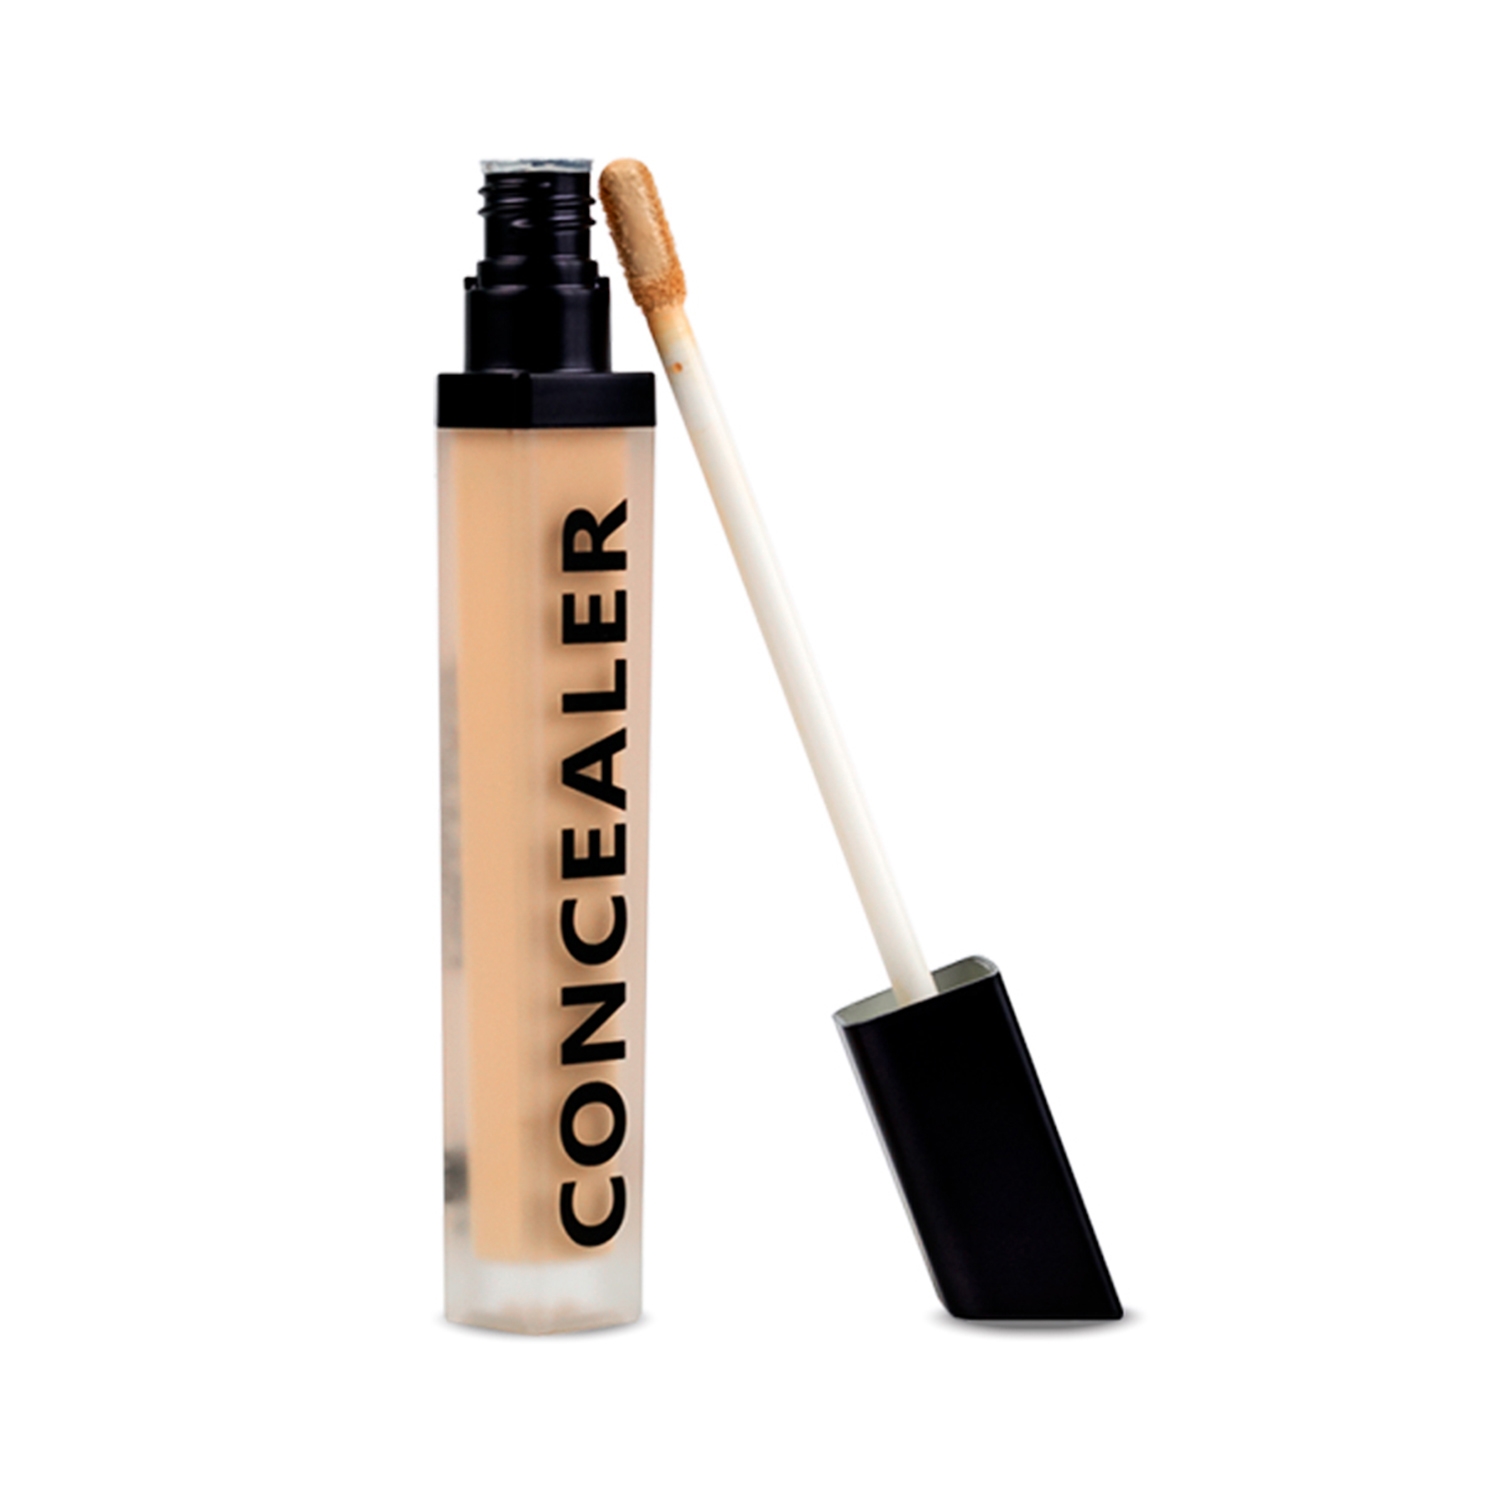 Daily Life Forever52 | Daily Life Forever52 Coverup Concealer CCU20.2 - Natural (7ml)